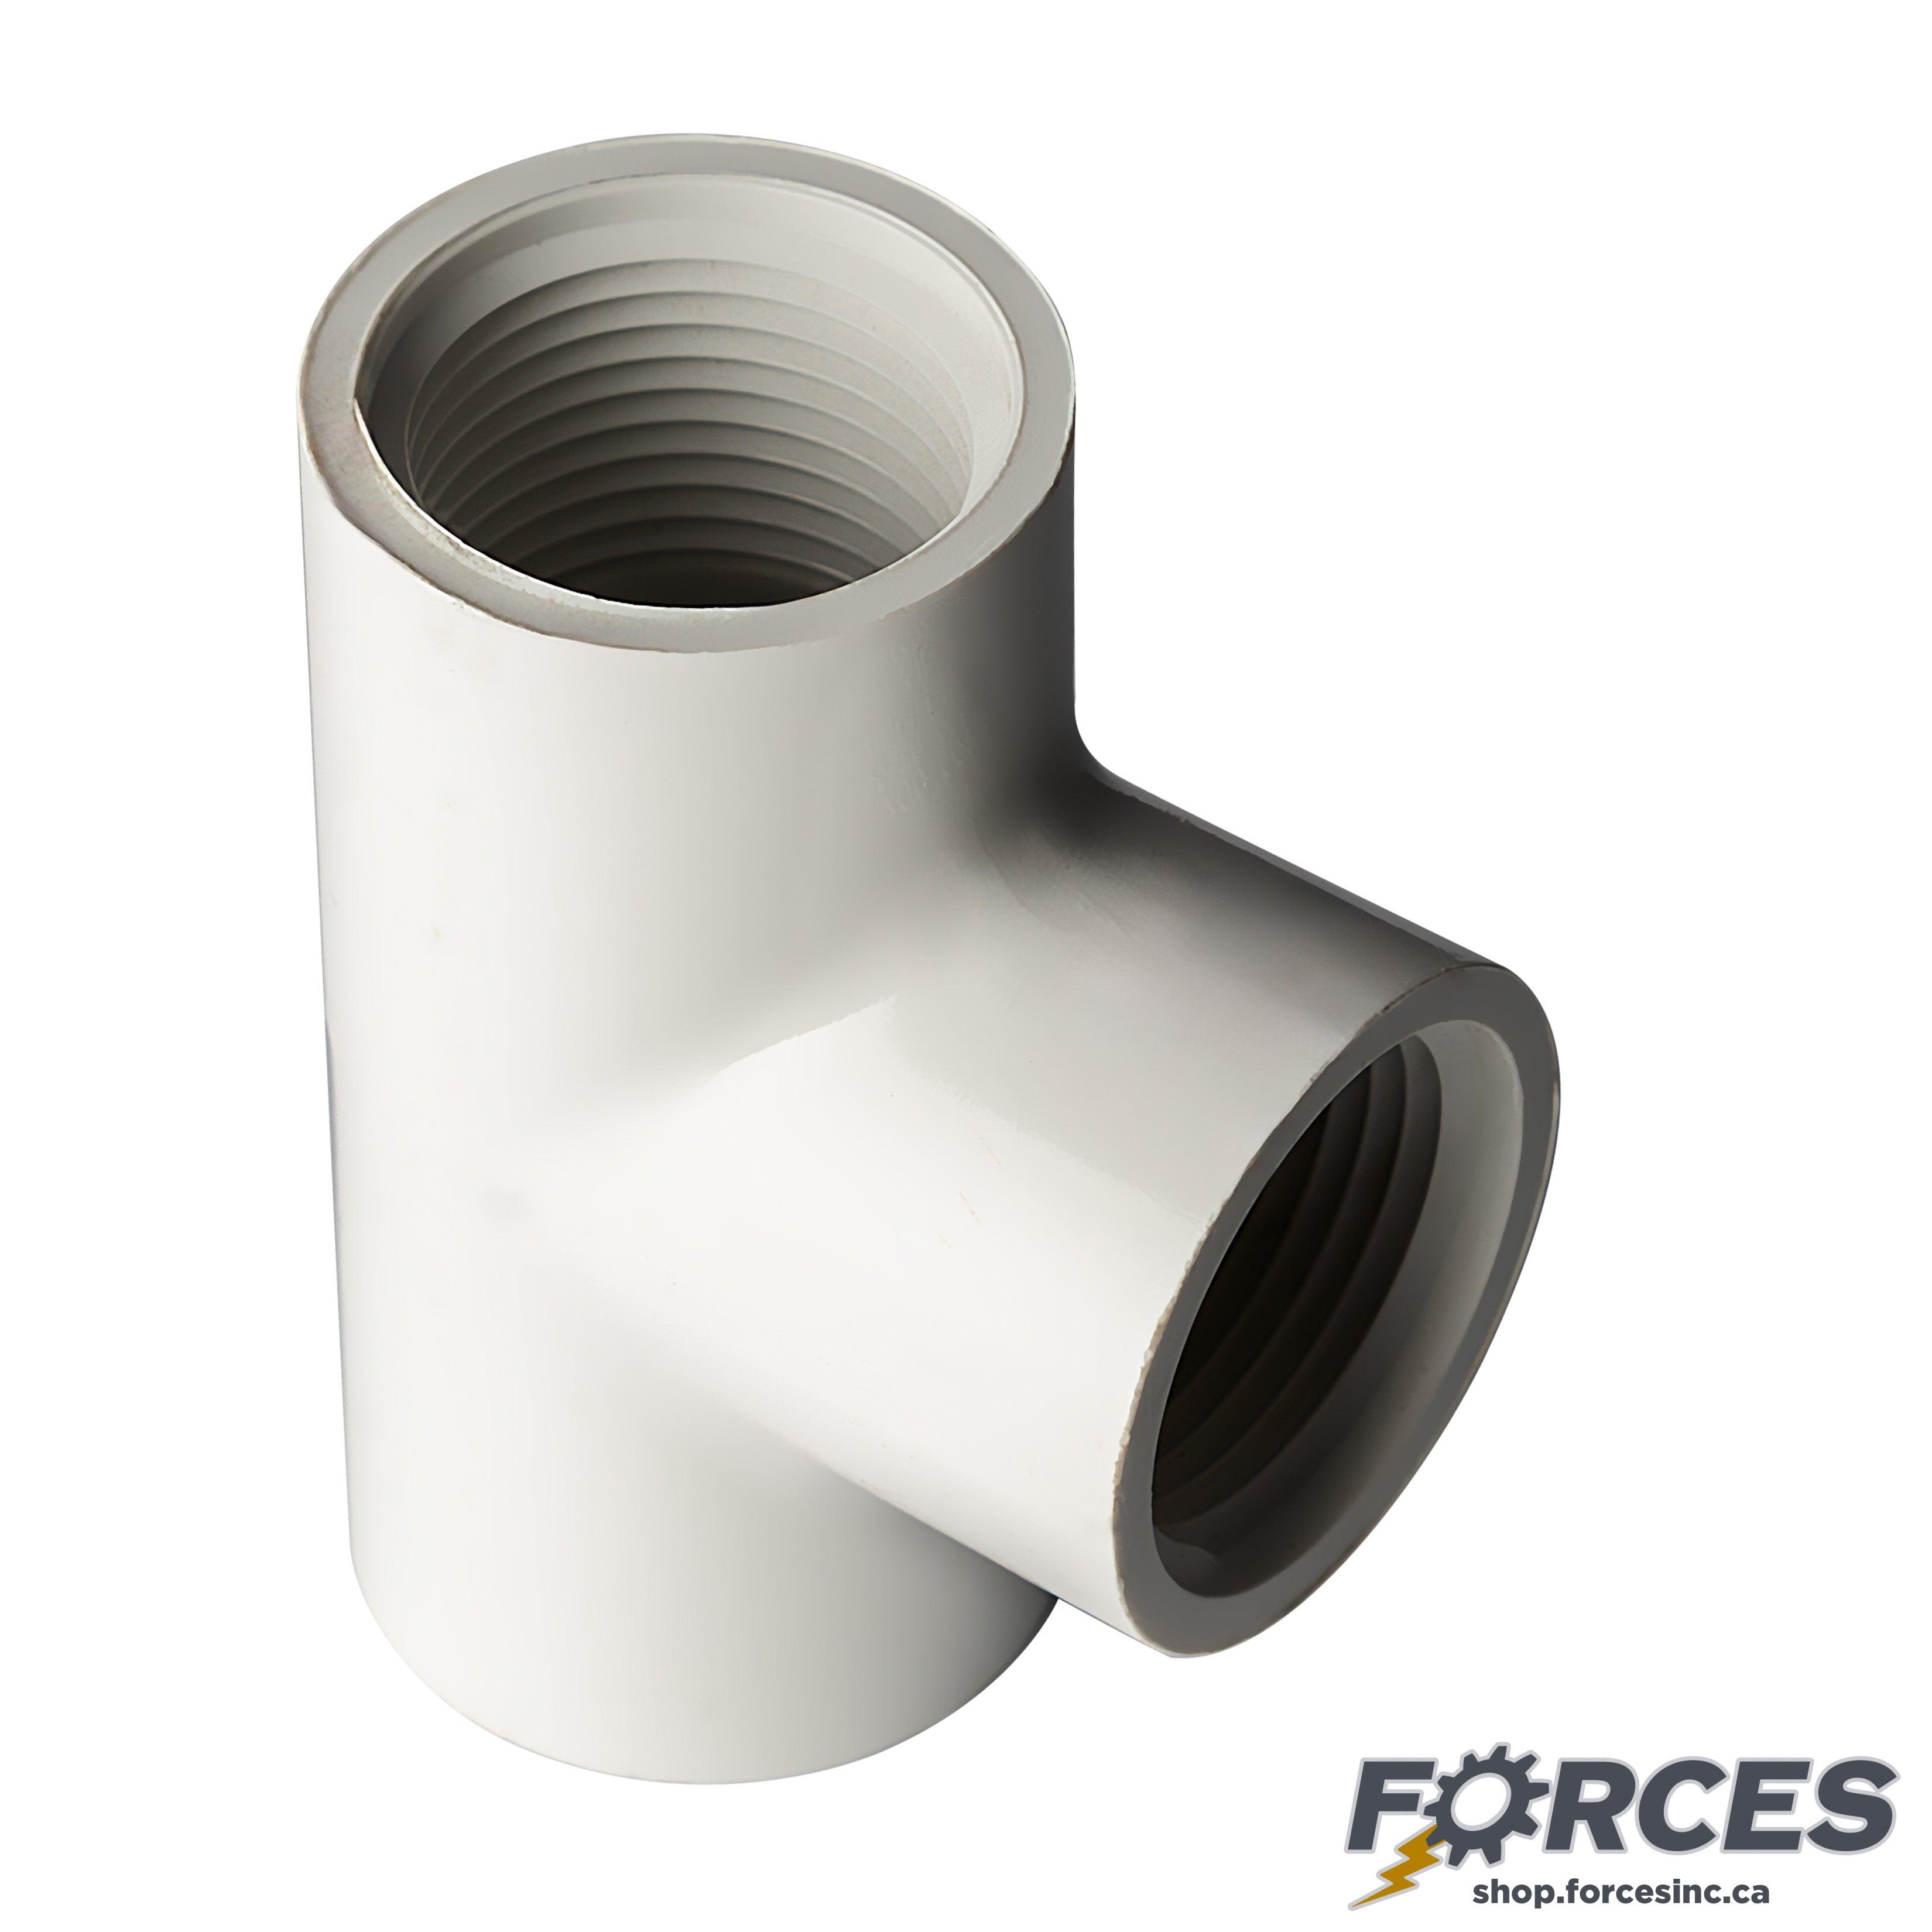 1/2" Tee (Threaded) Sch 40 - PVC white | 405005W - Forces Inc